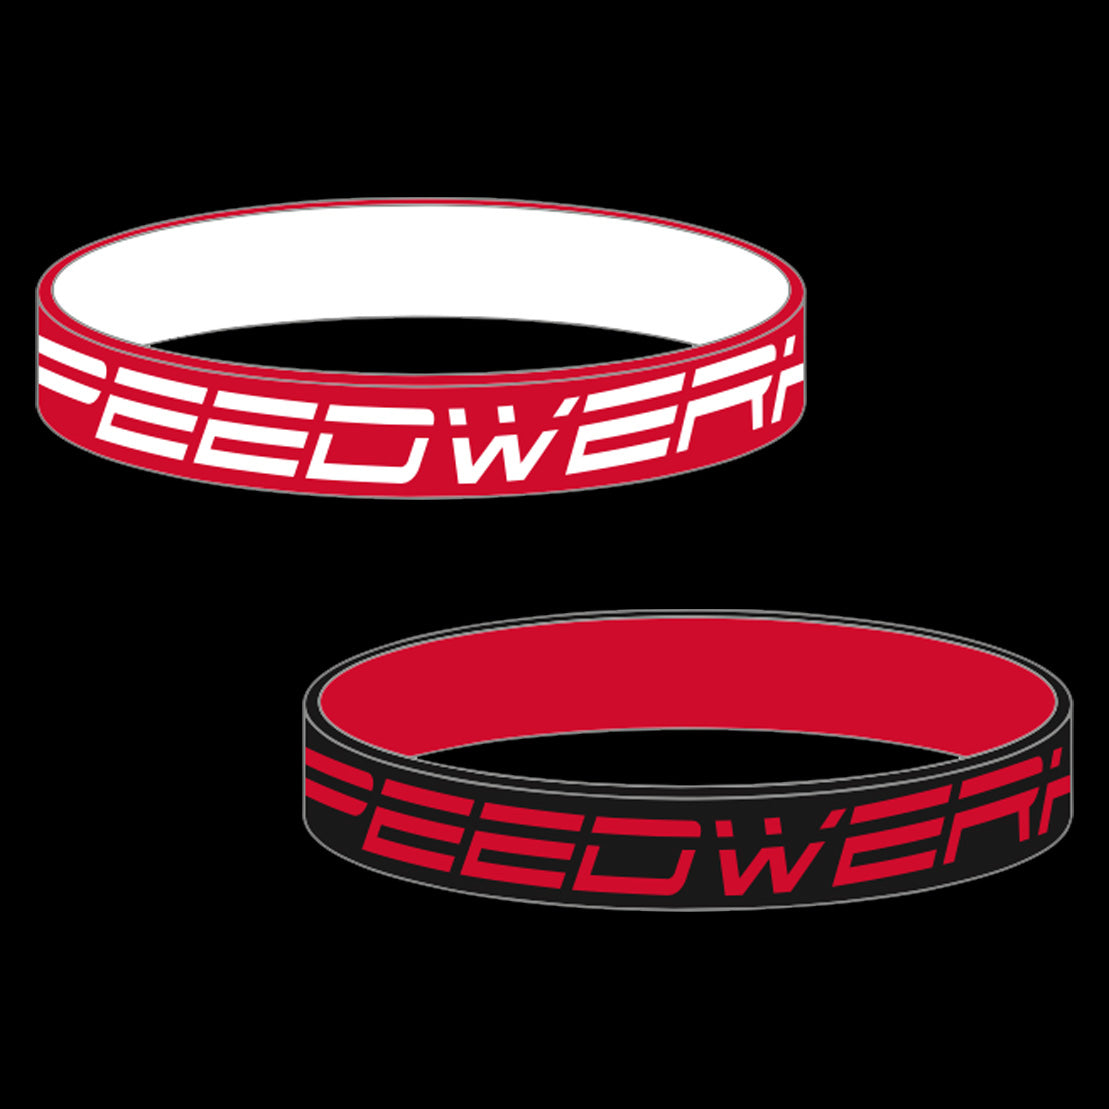 silicone armbands with the Speedwerkz logo